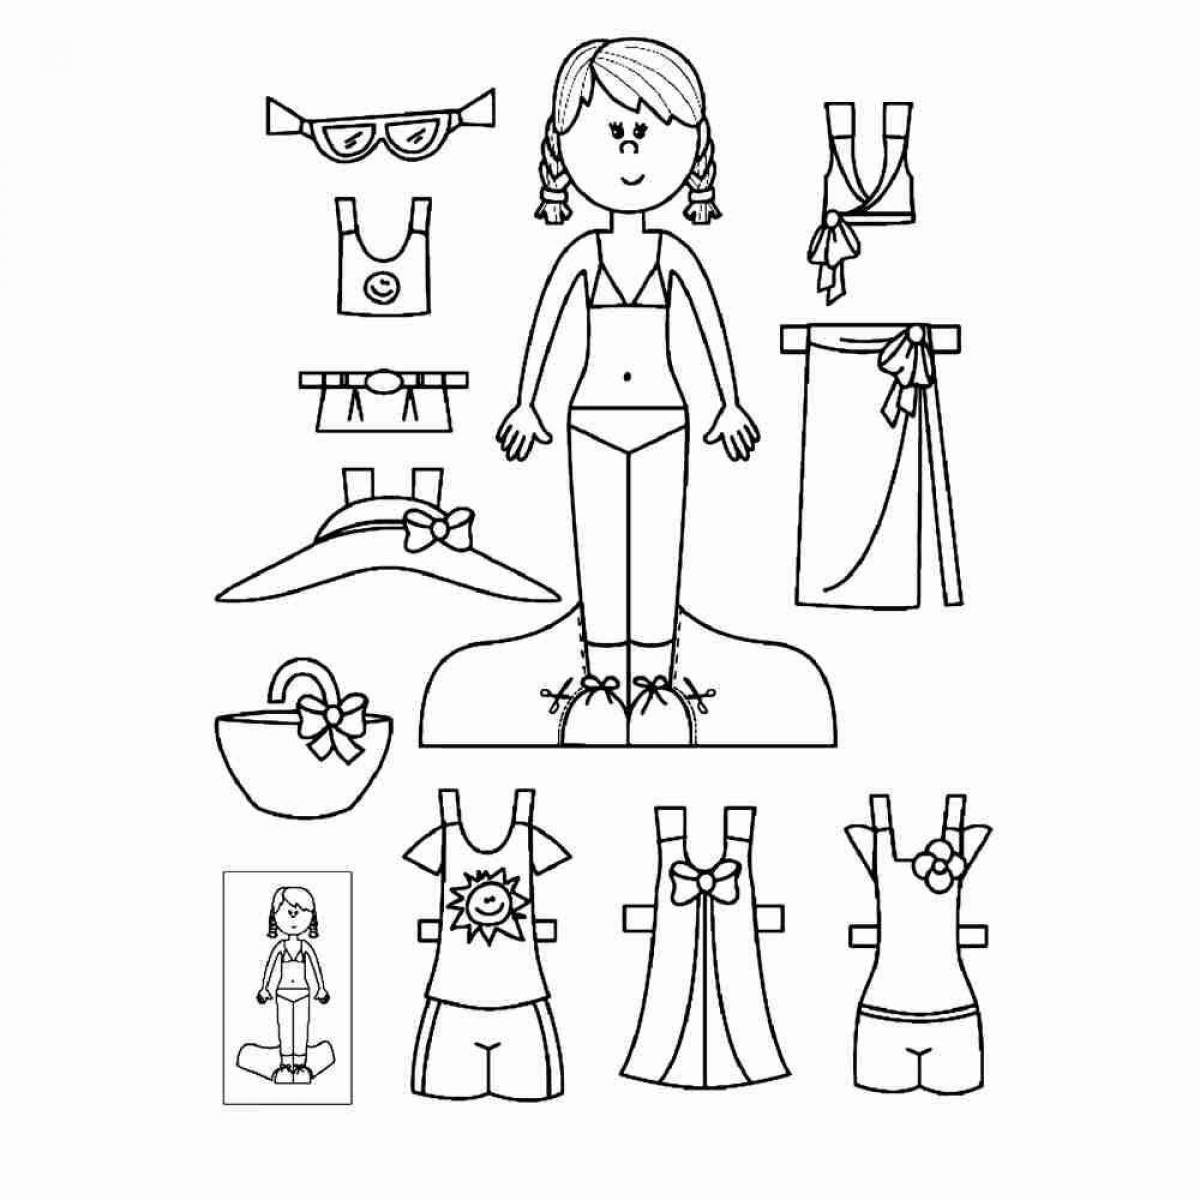 Sparkling coloring book for girls with cut out clothes